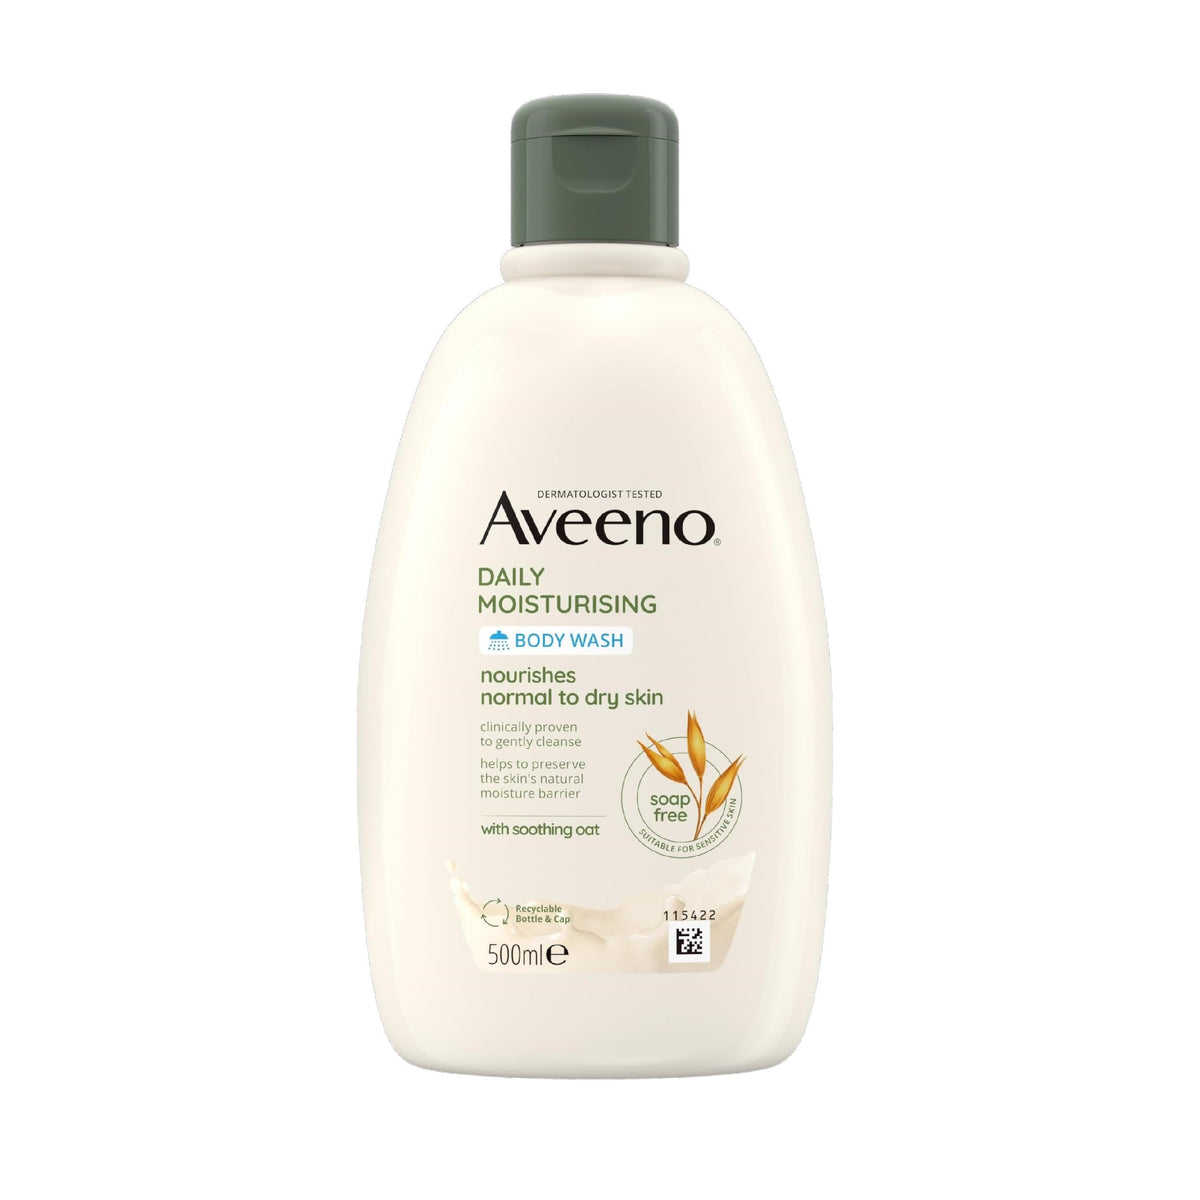 Aveeno Daily Moisturising Body Wash, With Soothing Oat, Suitable For Sensitive Skin, Gently Cleanses and Nourishes, Soap-Free, Lightly Scented, 500ml